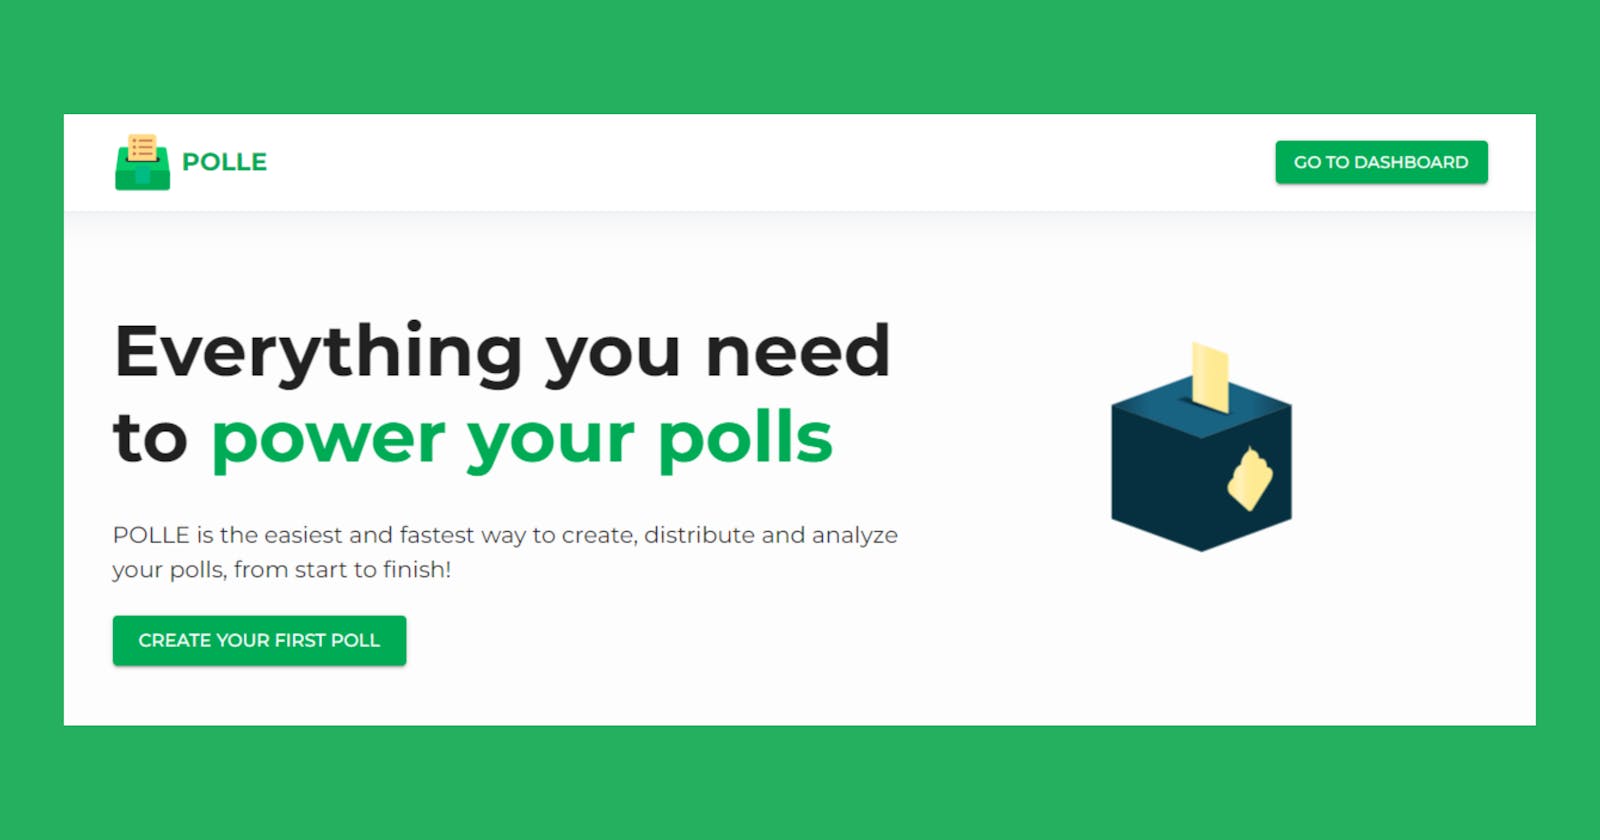 Introducing Polle - Create, Distribute and Analyze Polls.